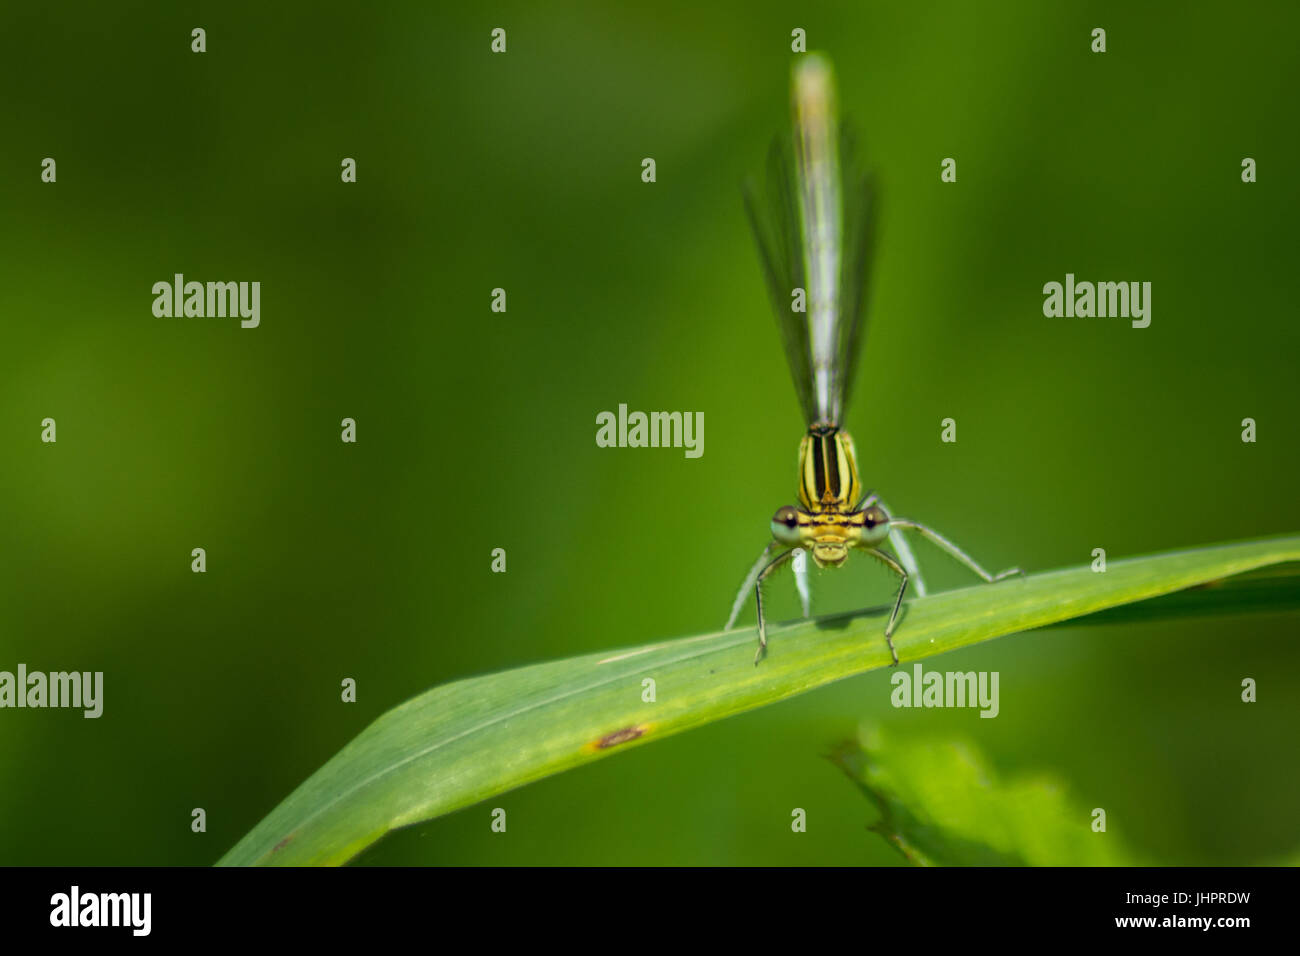 Damselfies are insects similar to dragonflies. Stock Photo